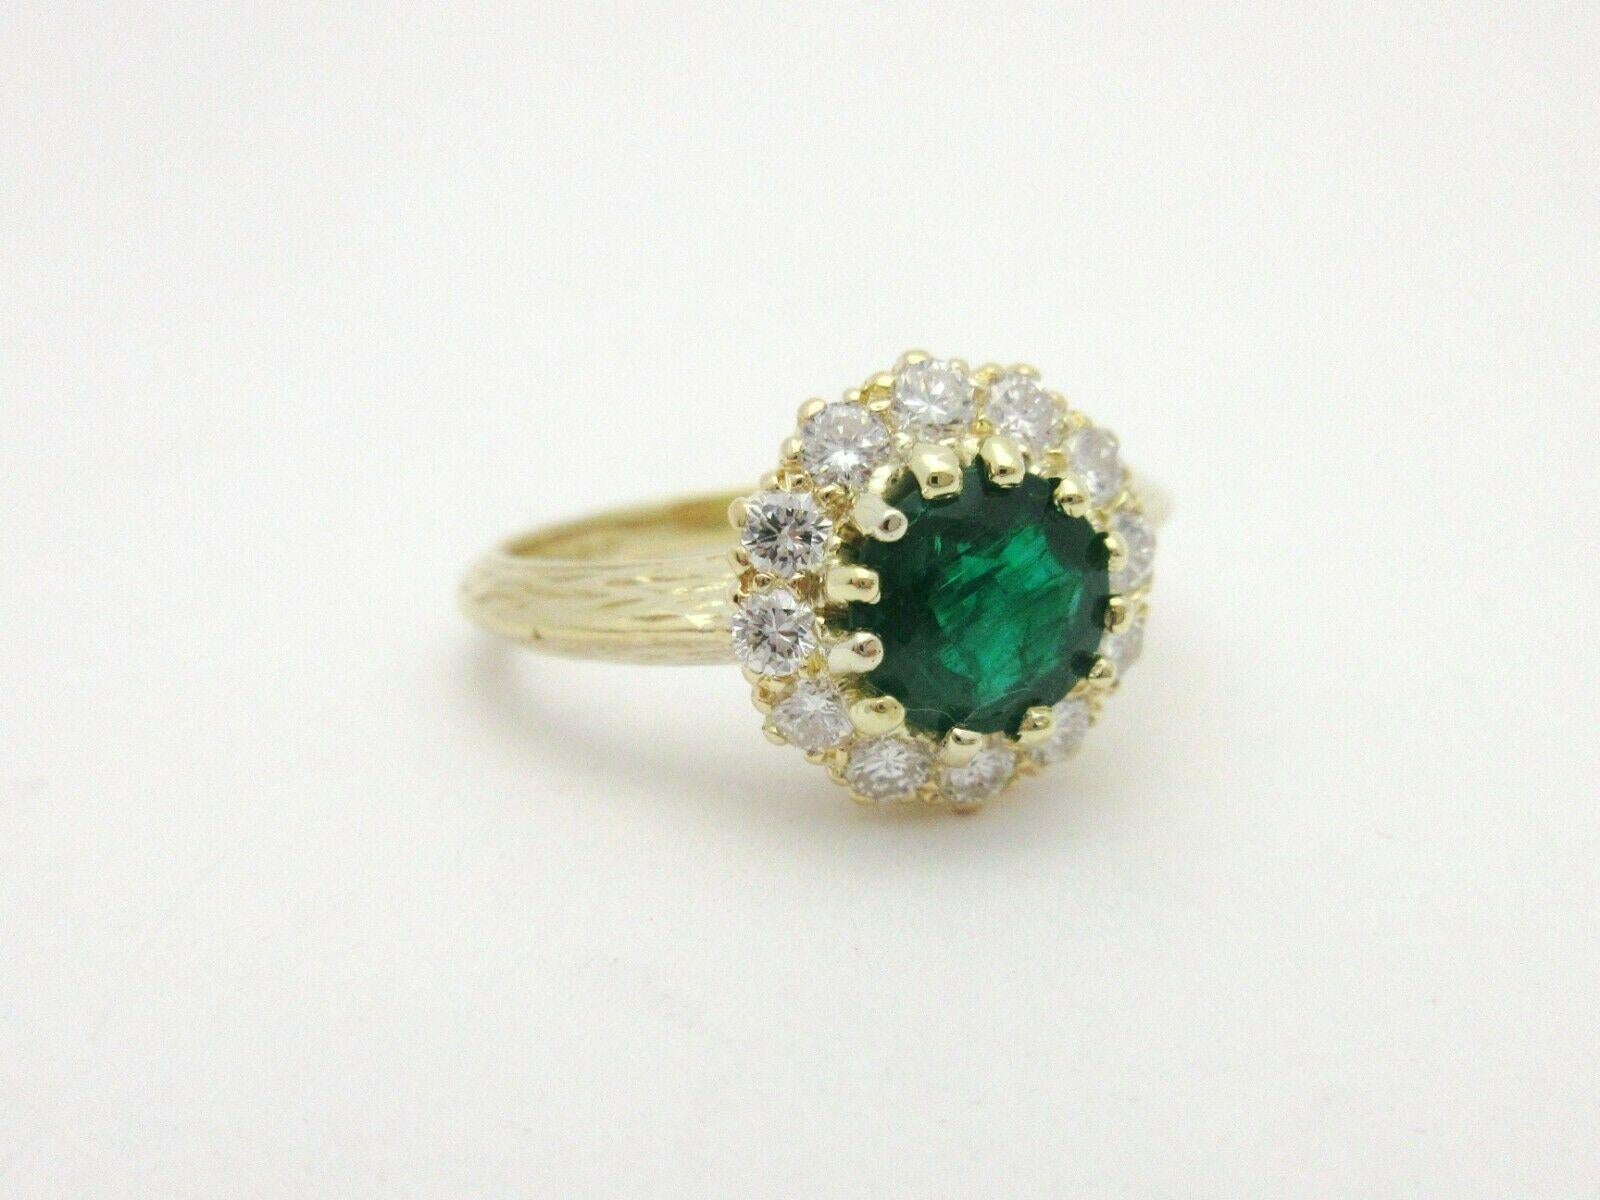 This beautifully made statement ring is a testament to fine work with gemstone flair honoring May birthdays or anyone with an affinity for emeralds.

The ring, crafted entirely in 18k yellow gold, features a stunning 1.5ct. emerald surrounded by